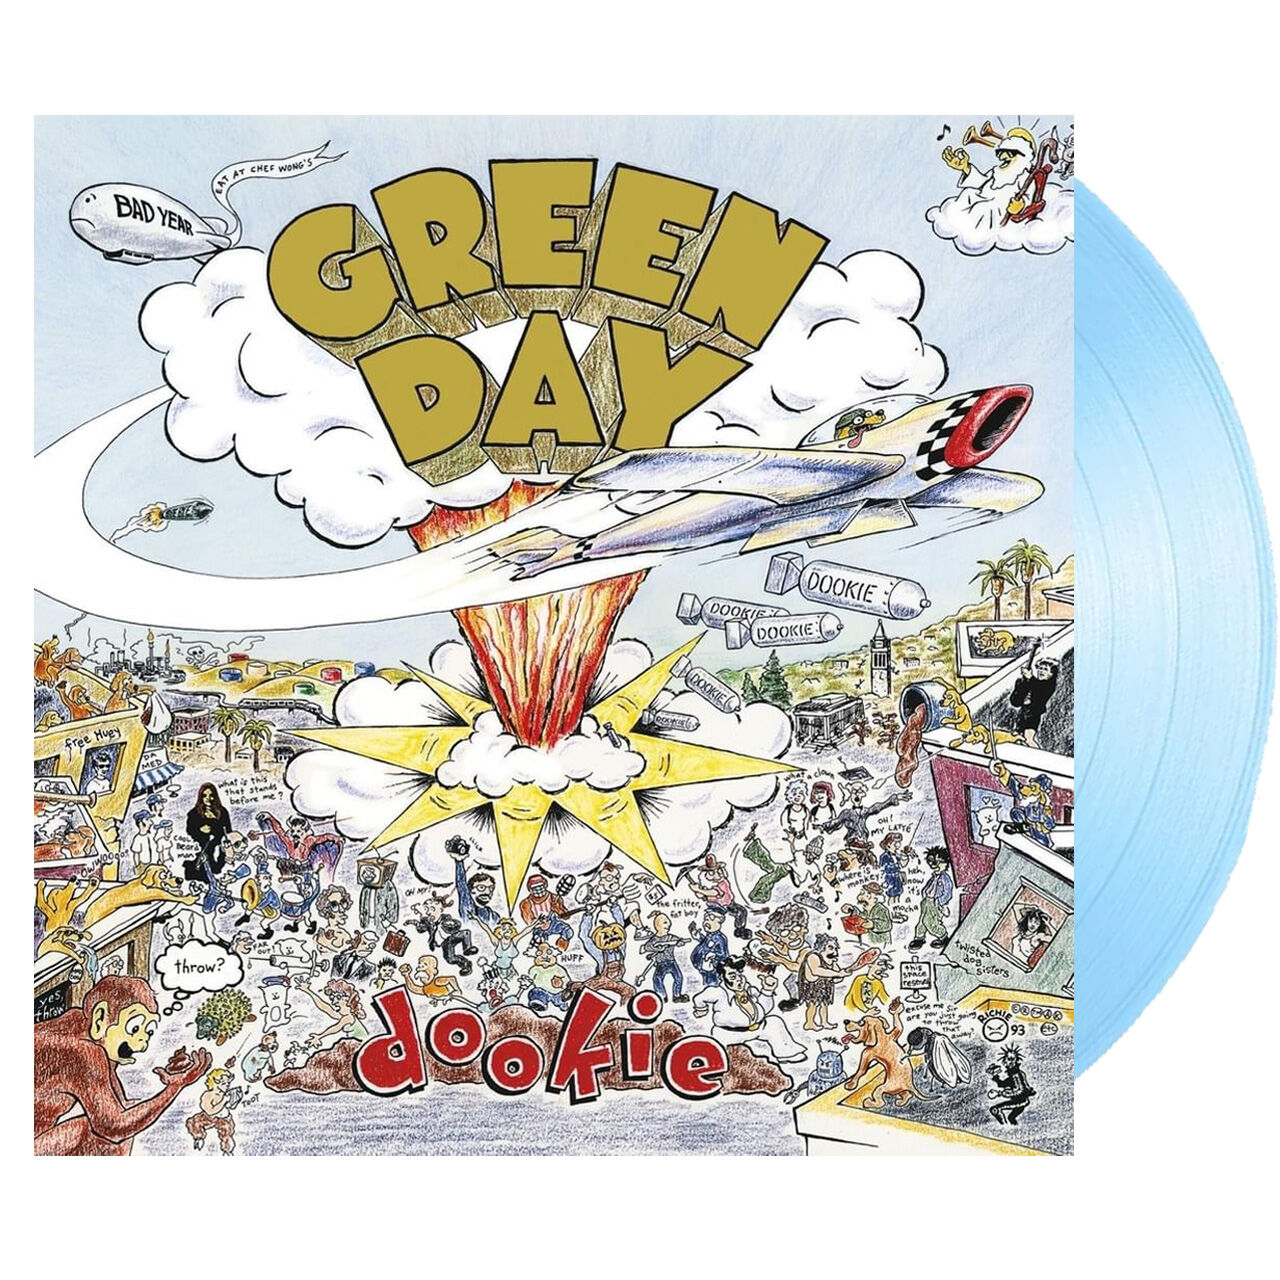 Green Day - Dookie (30th Anniversary Edition, Baby Blue Vinyl)